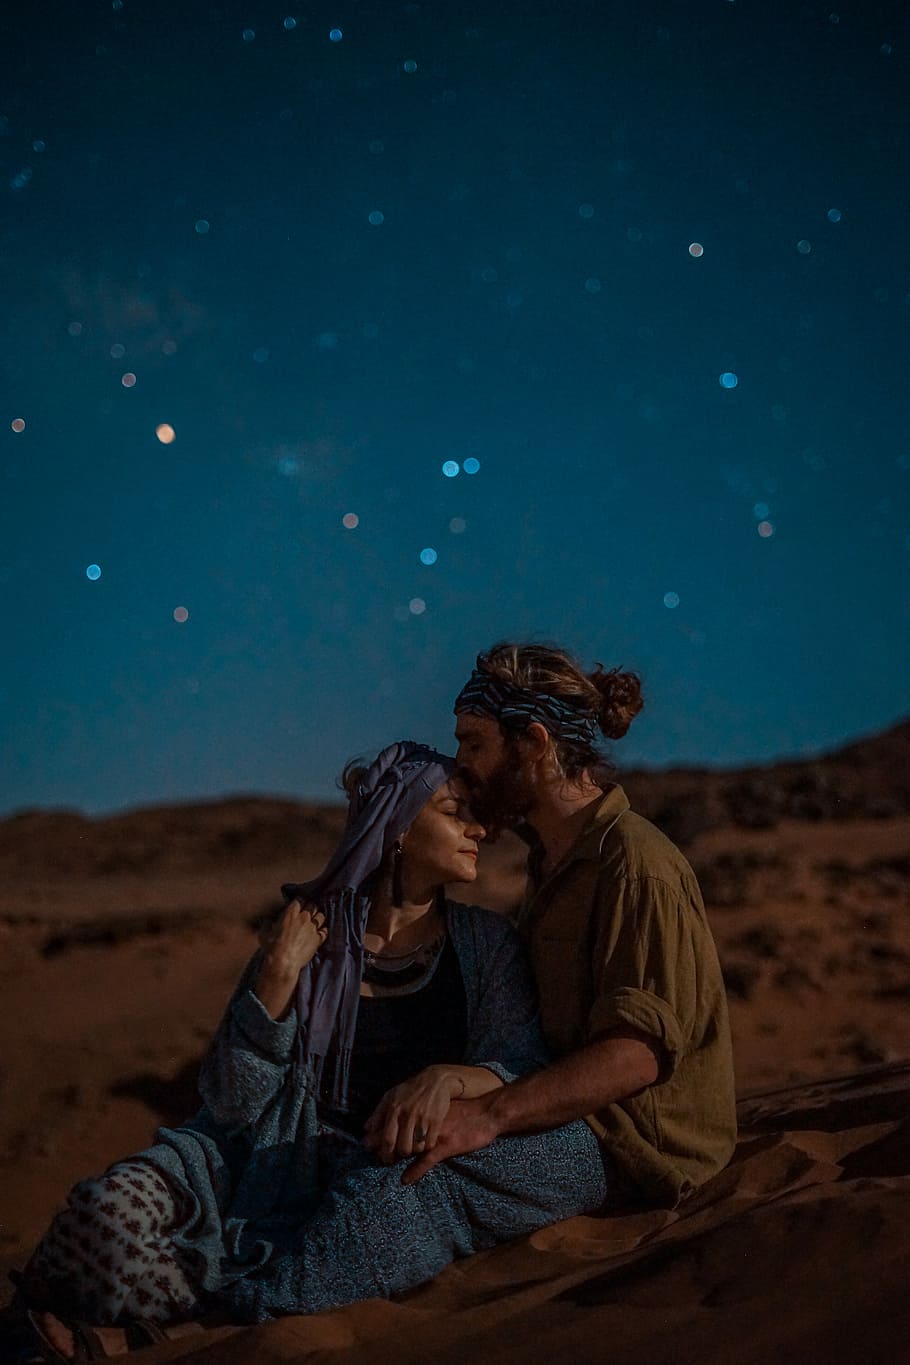 man and woman sitting on desert sand under blue sky during nighttime, man kissing woman's forehead, HD wallpaper